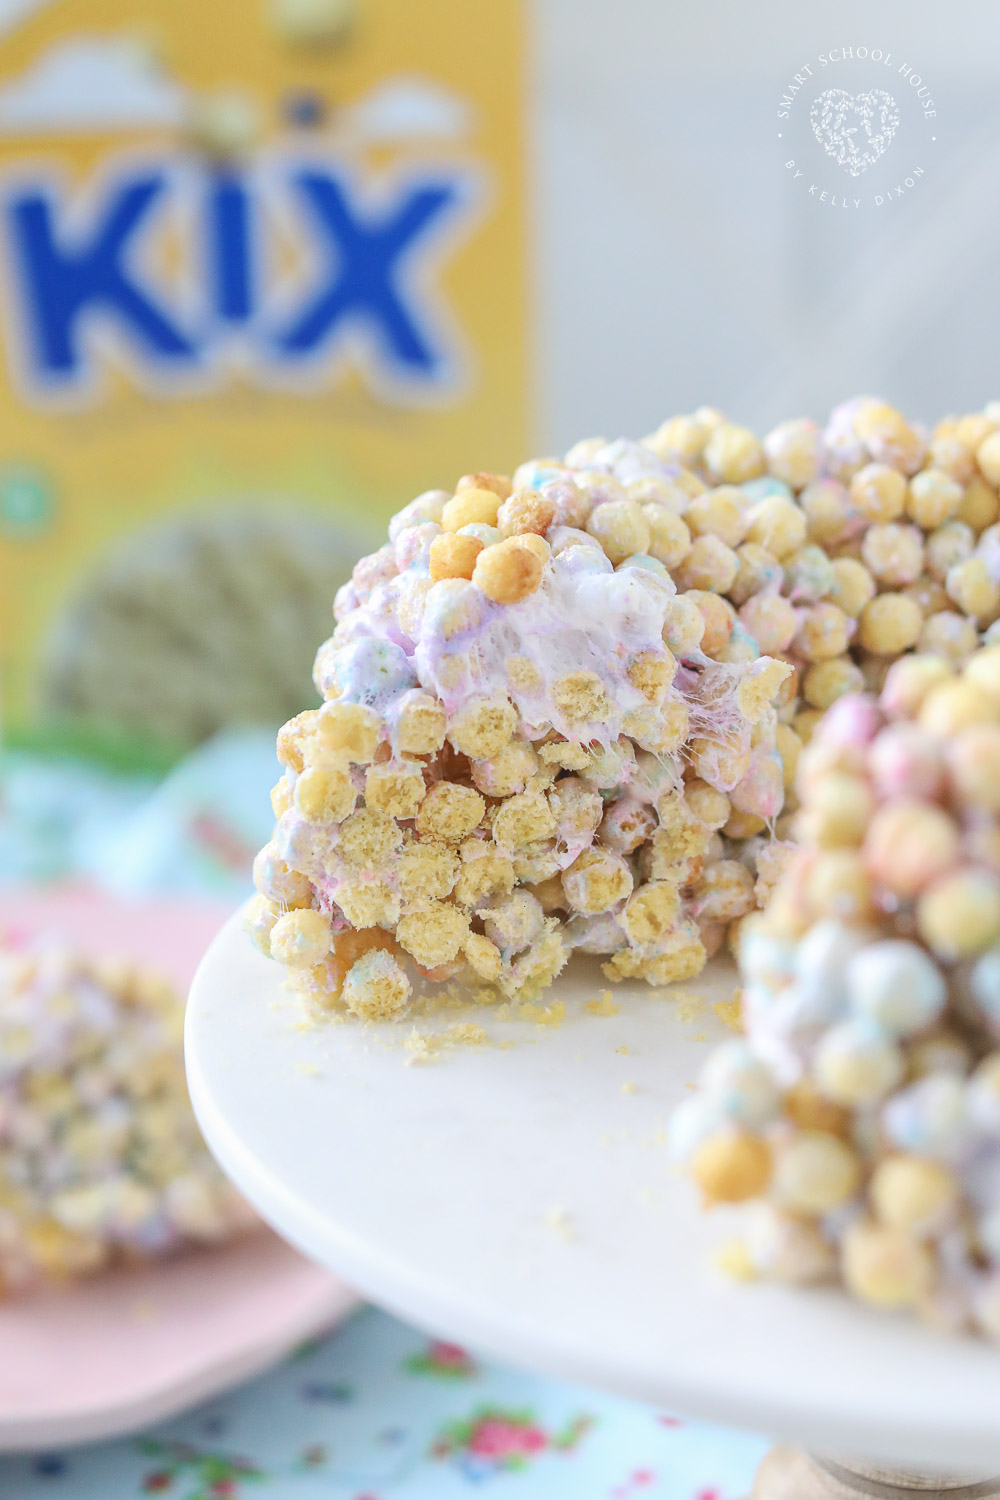 This colorful Peeps Bundt Cake is made of Kix and melted Peeps marshmallows! Made in a bundt cake pan and cut into cereal Peeps treats!